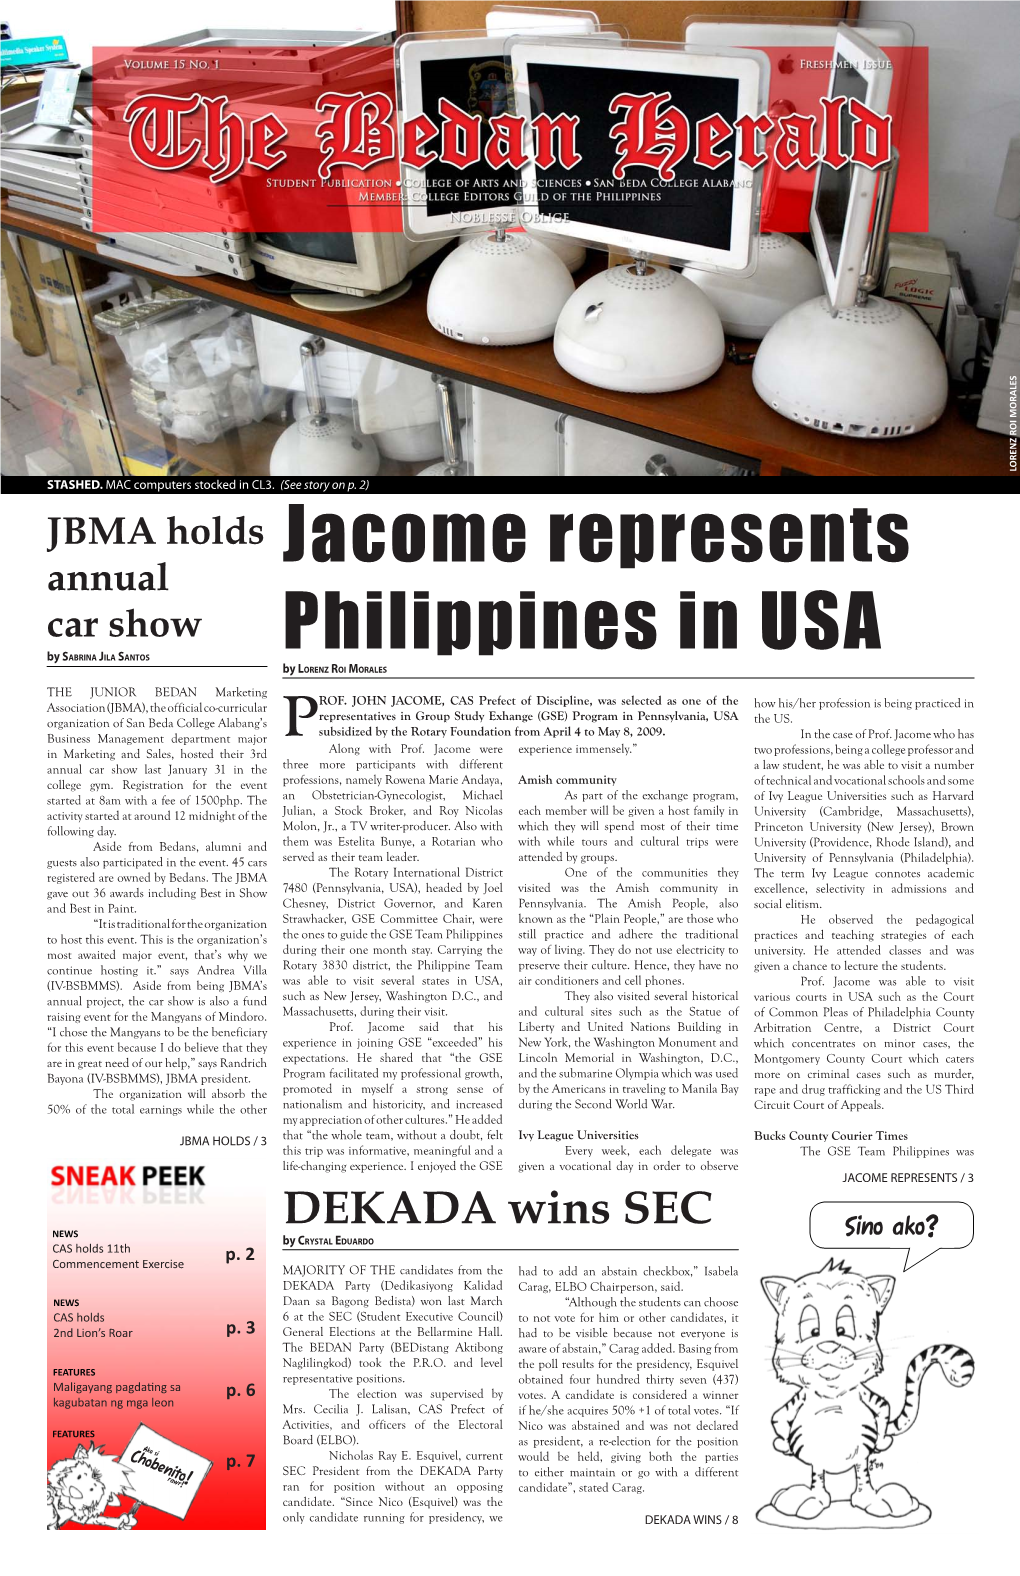 Jacome Represents Philippines In